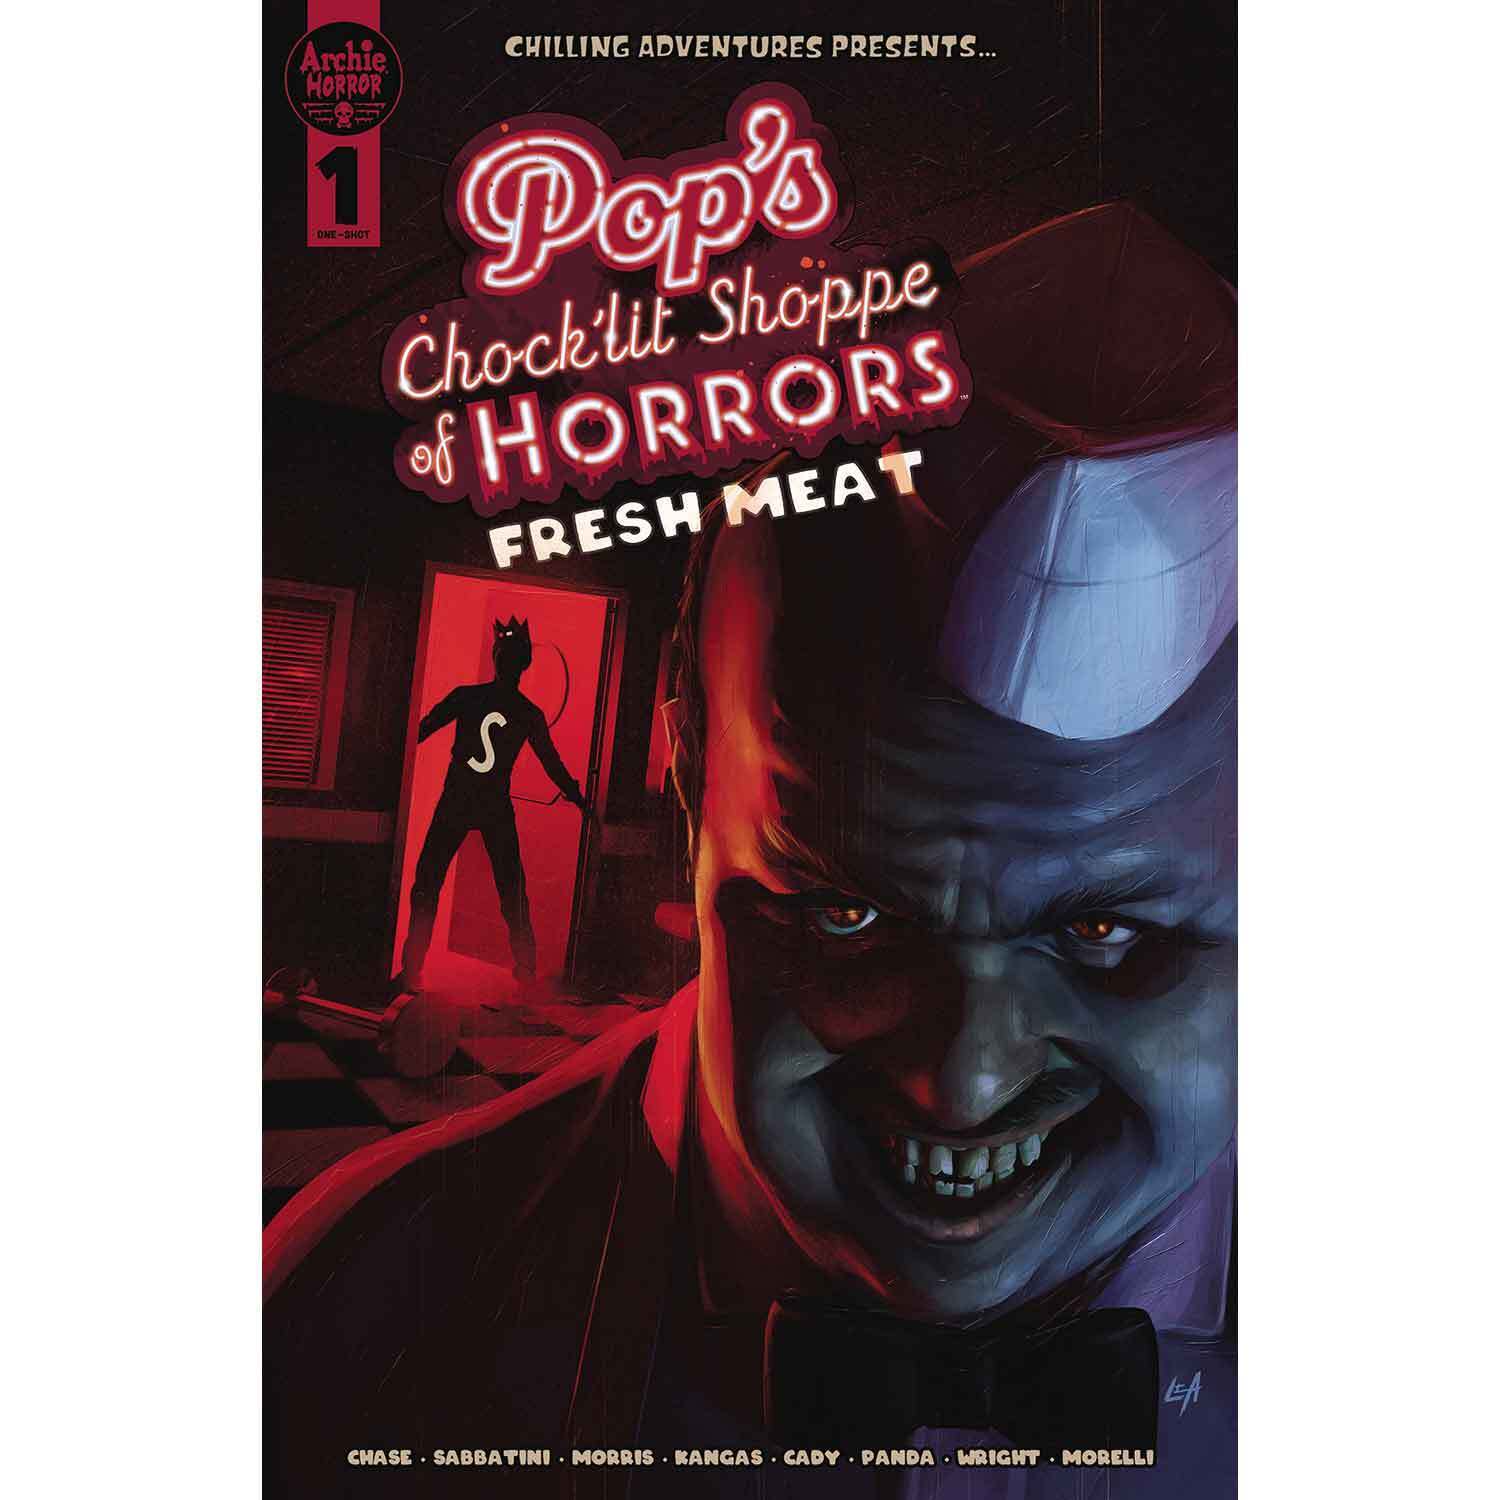 Pops Chocklit Shoppe Of Horrors Fresh Meat Cover B Aaron Lea Archie